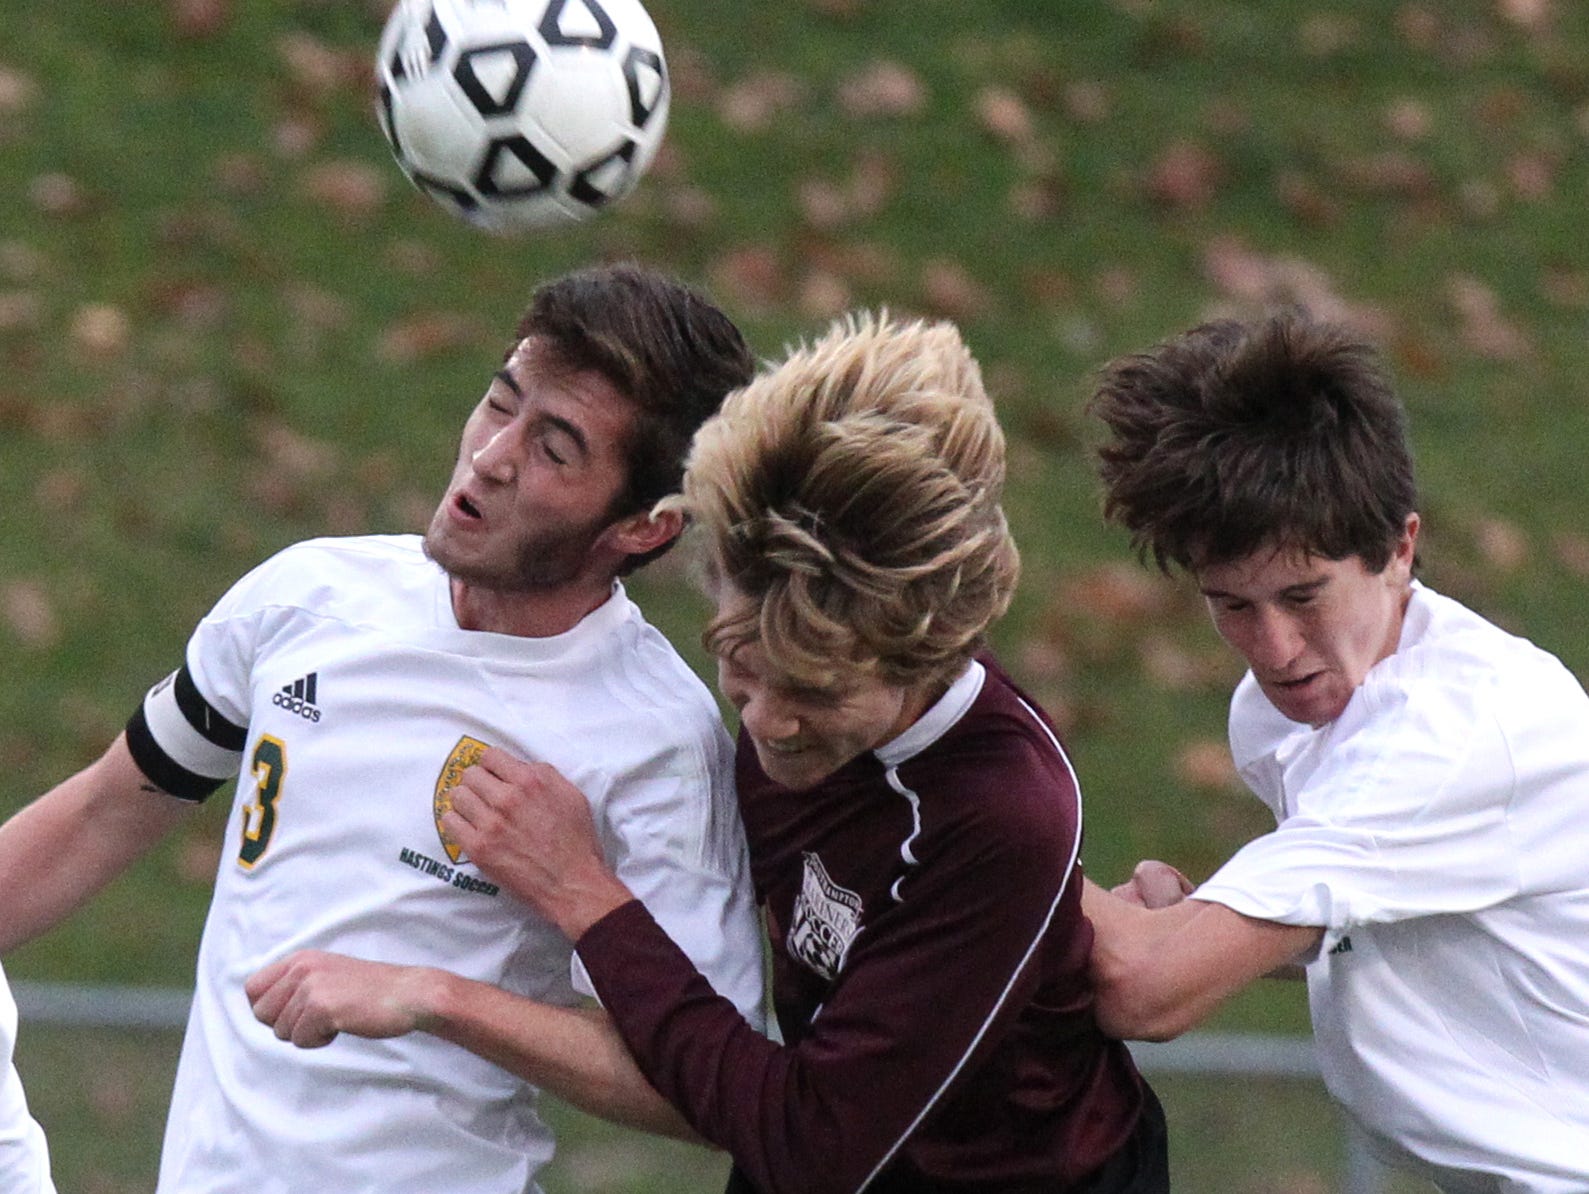 Hastings' Will Berritt, left, goes up for a header with Southampton's Sebastian Pereira during their Class B boys soccer regional final Nov. 7, 2015. Hastings won 1-0.